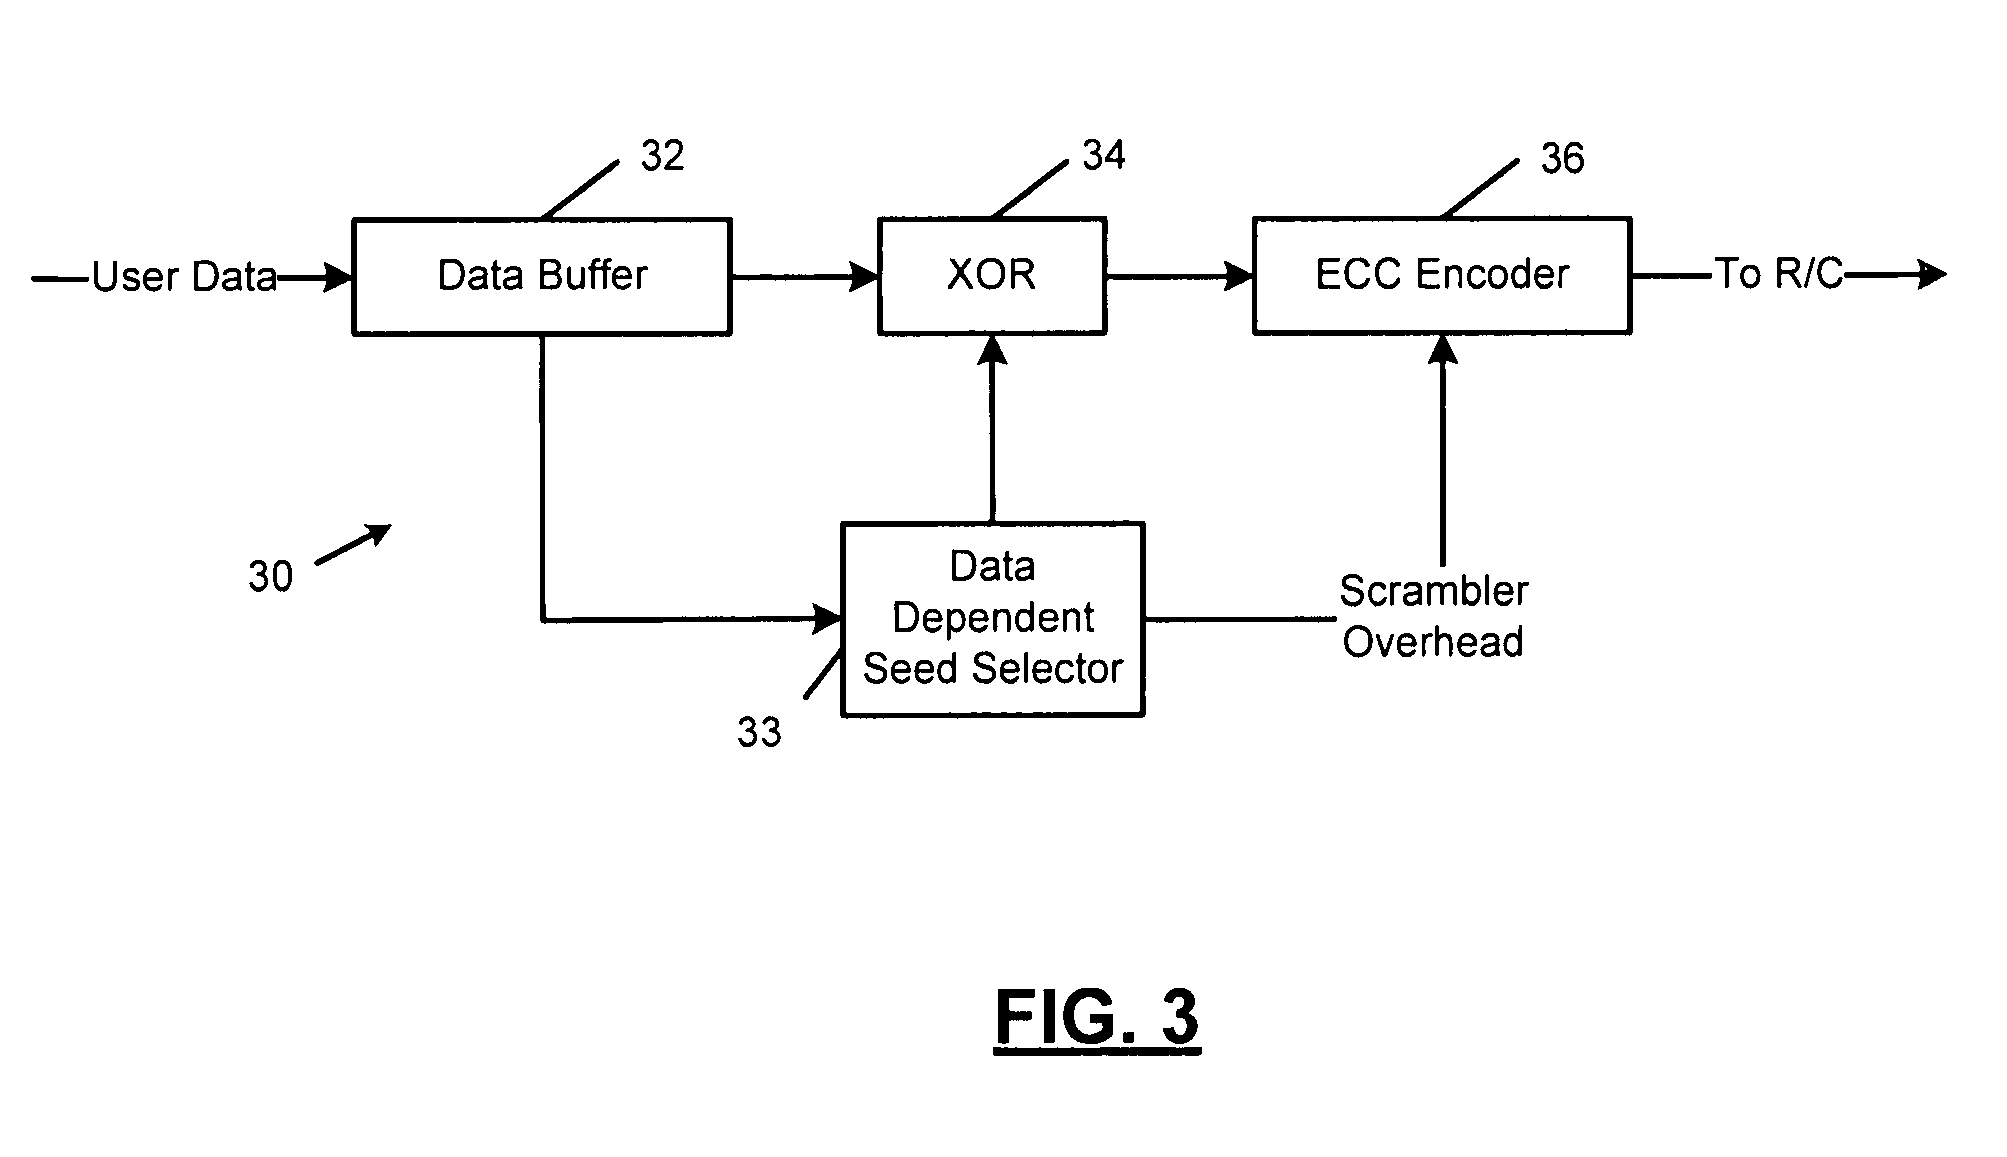 Methods and apparatus for improving minimum hamming weights of a sequence